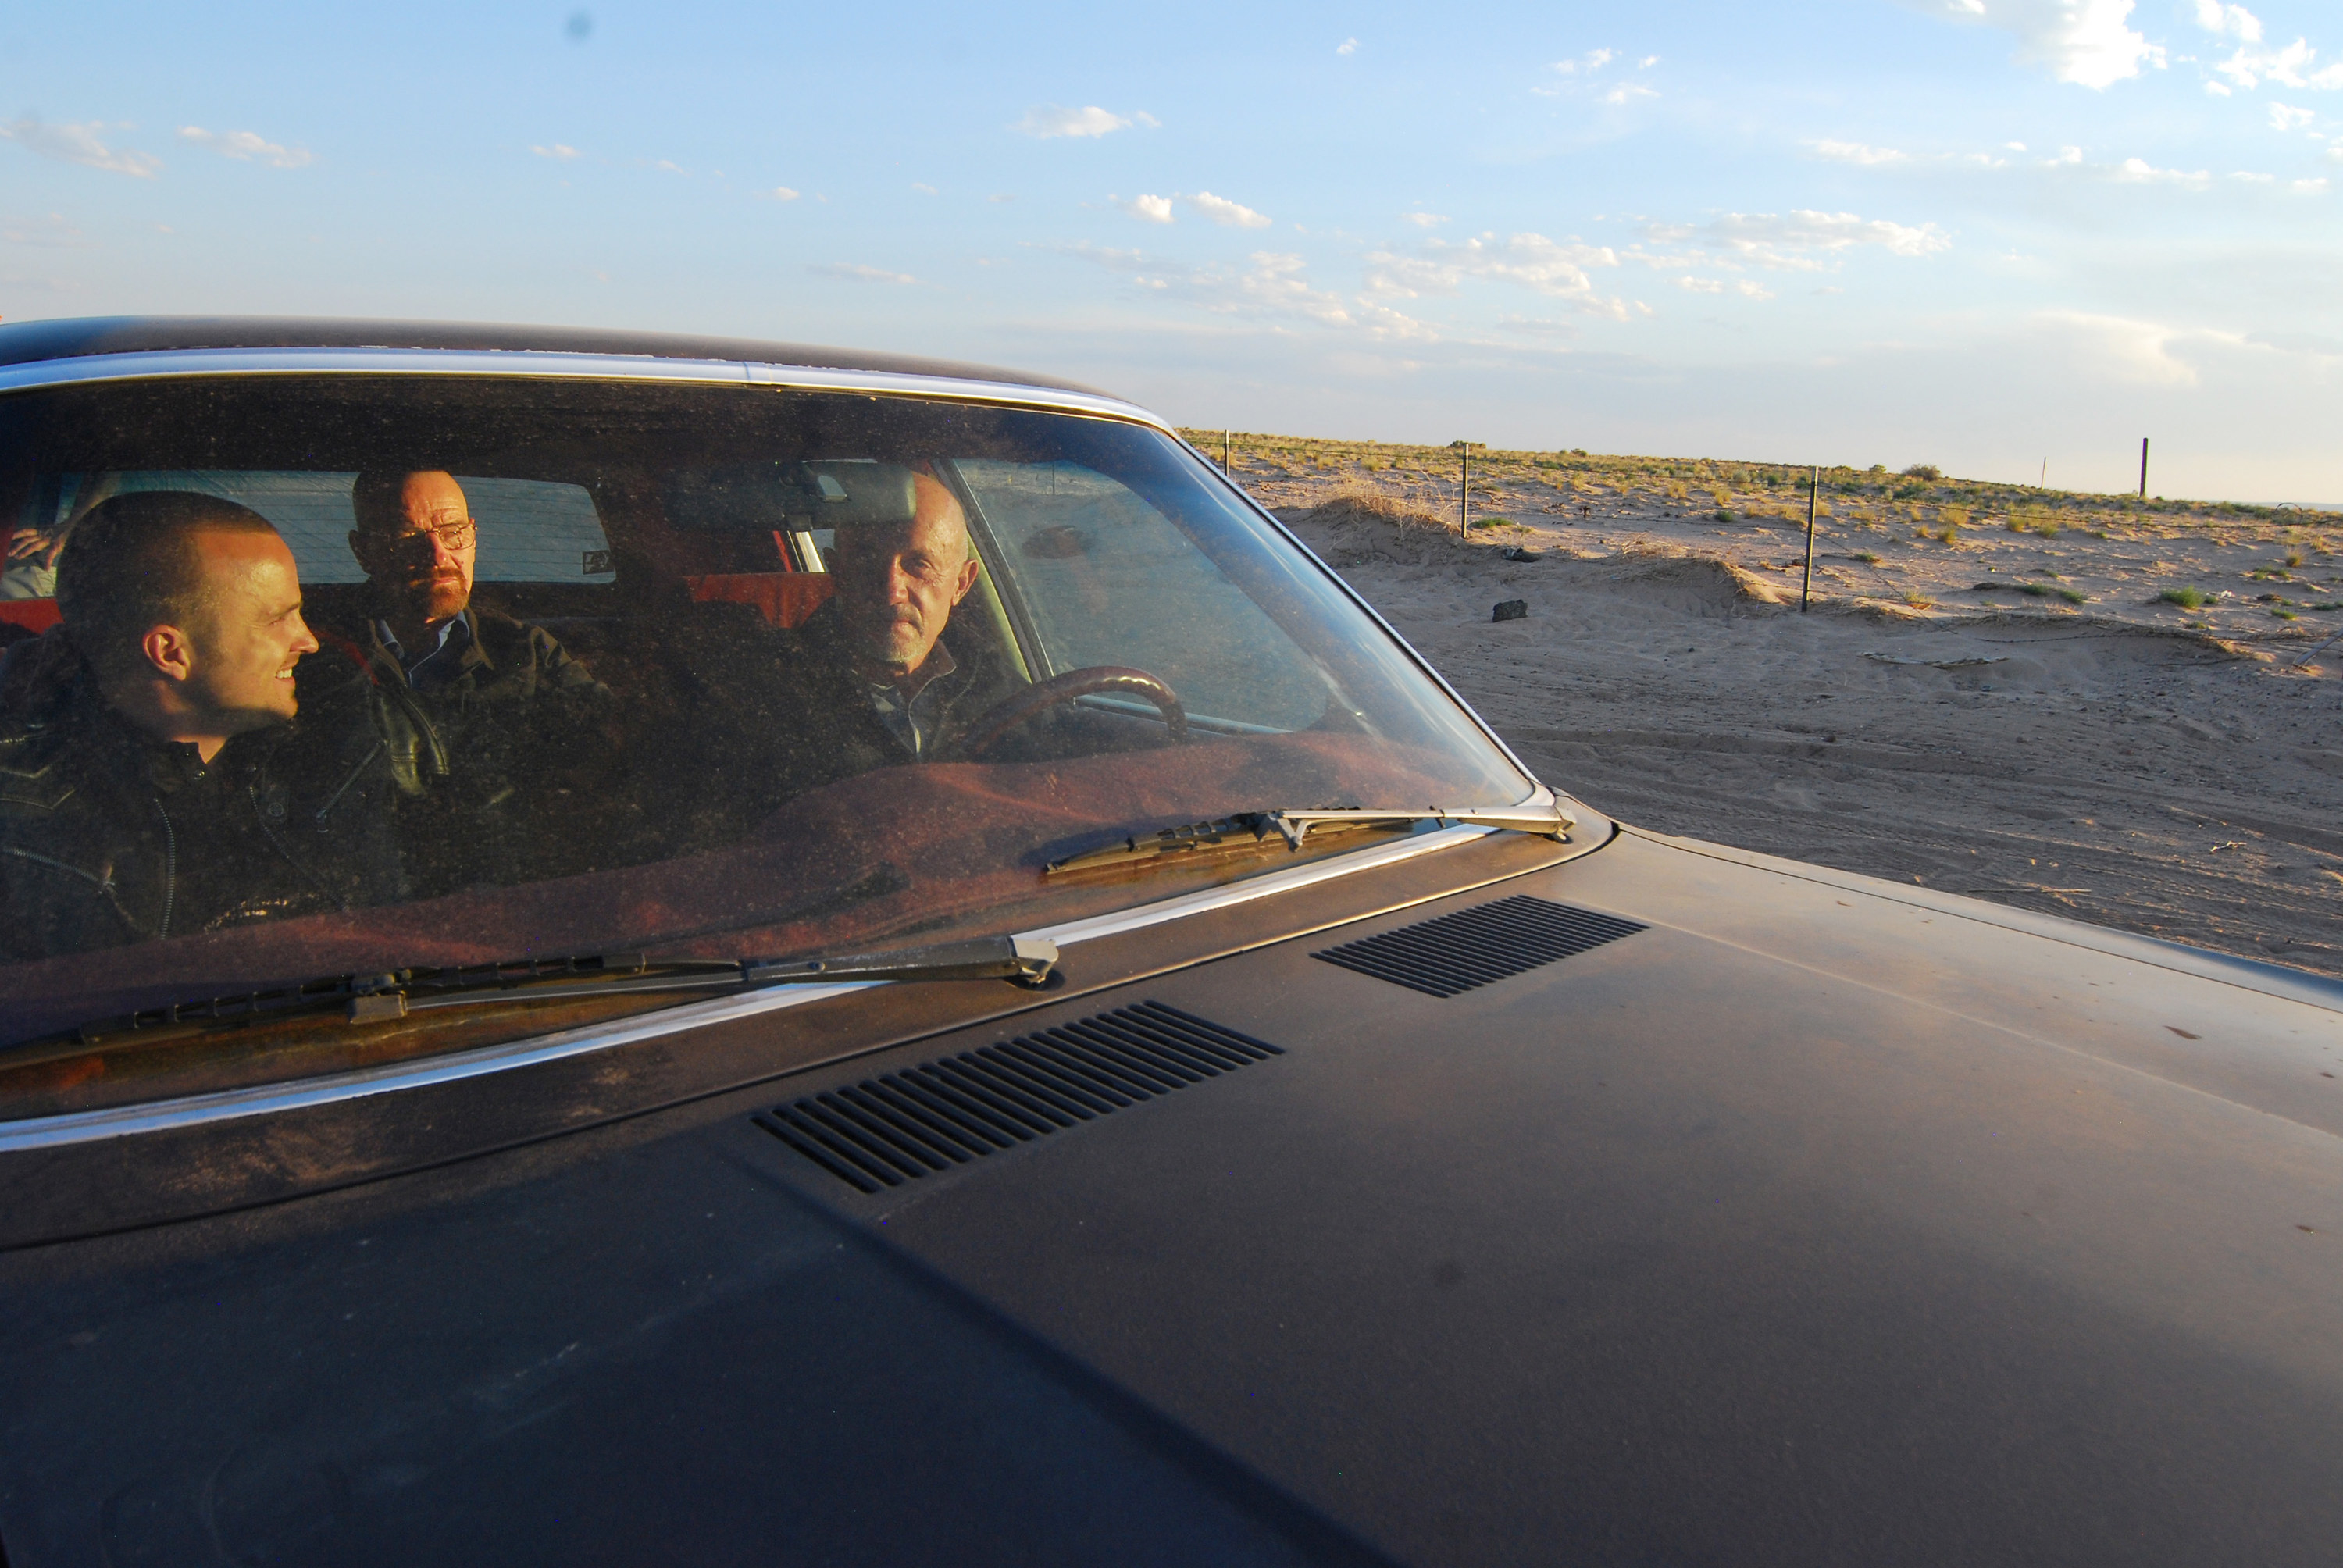 Mike in the car with Pinkman and Walter